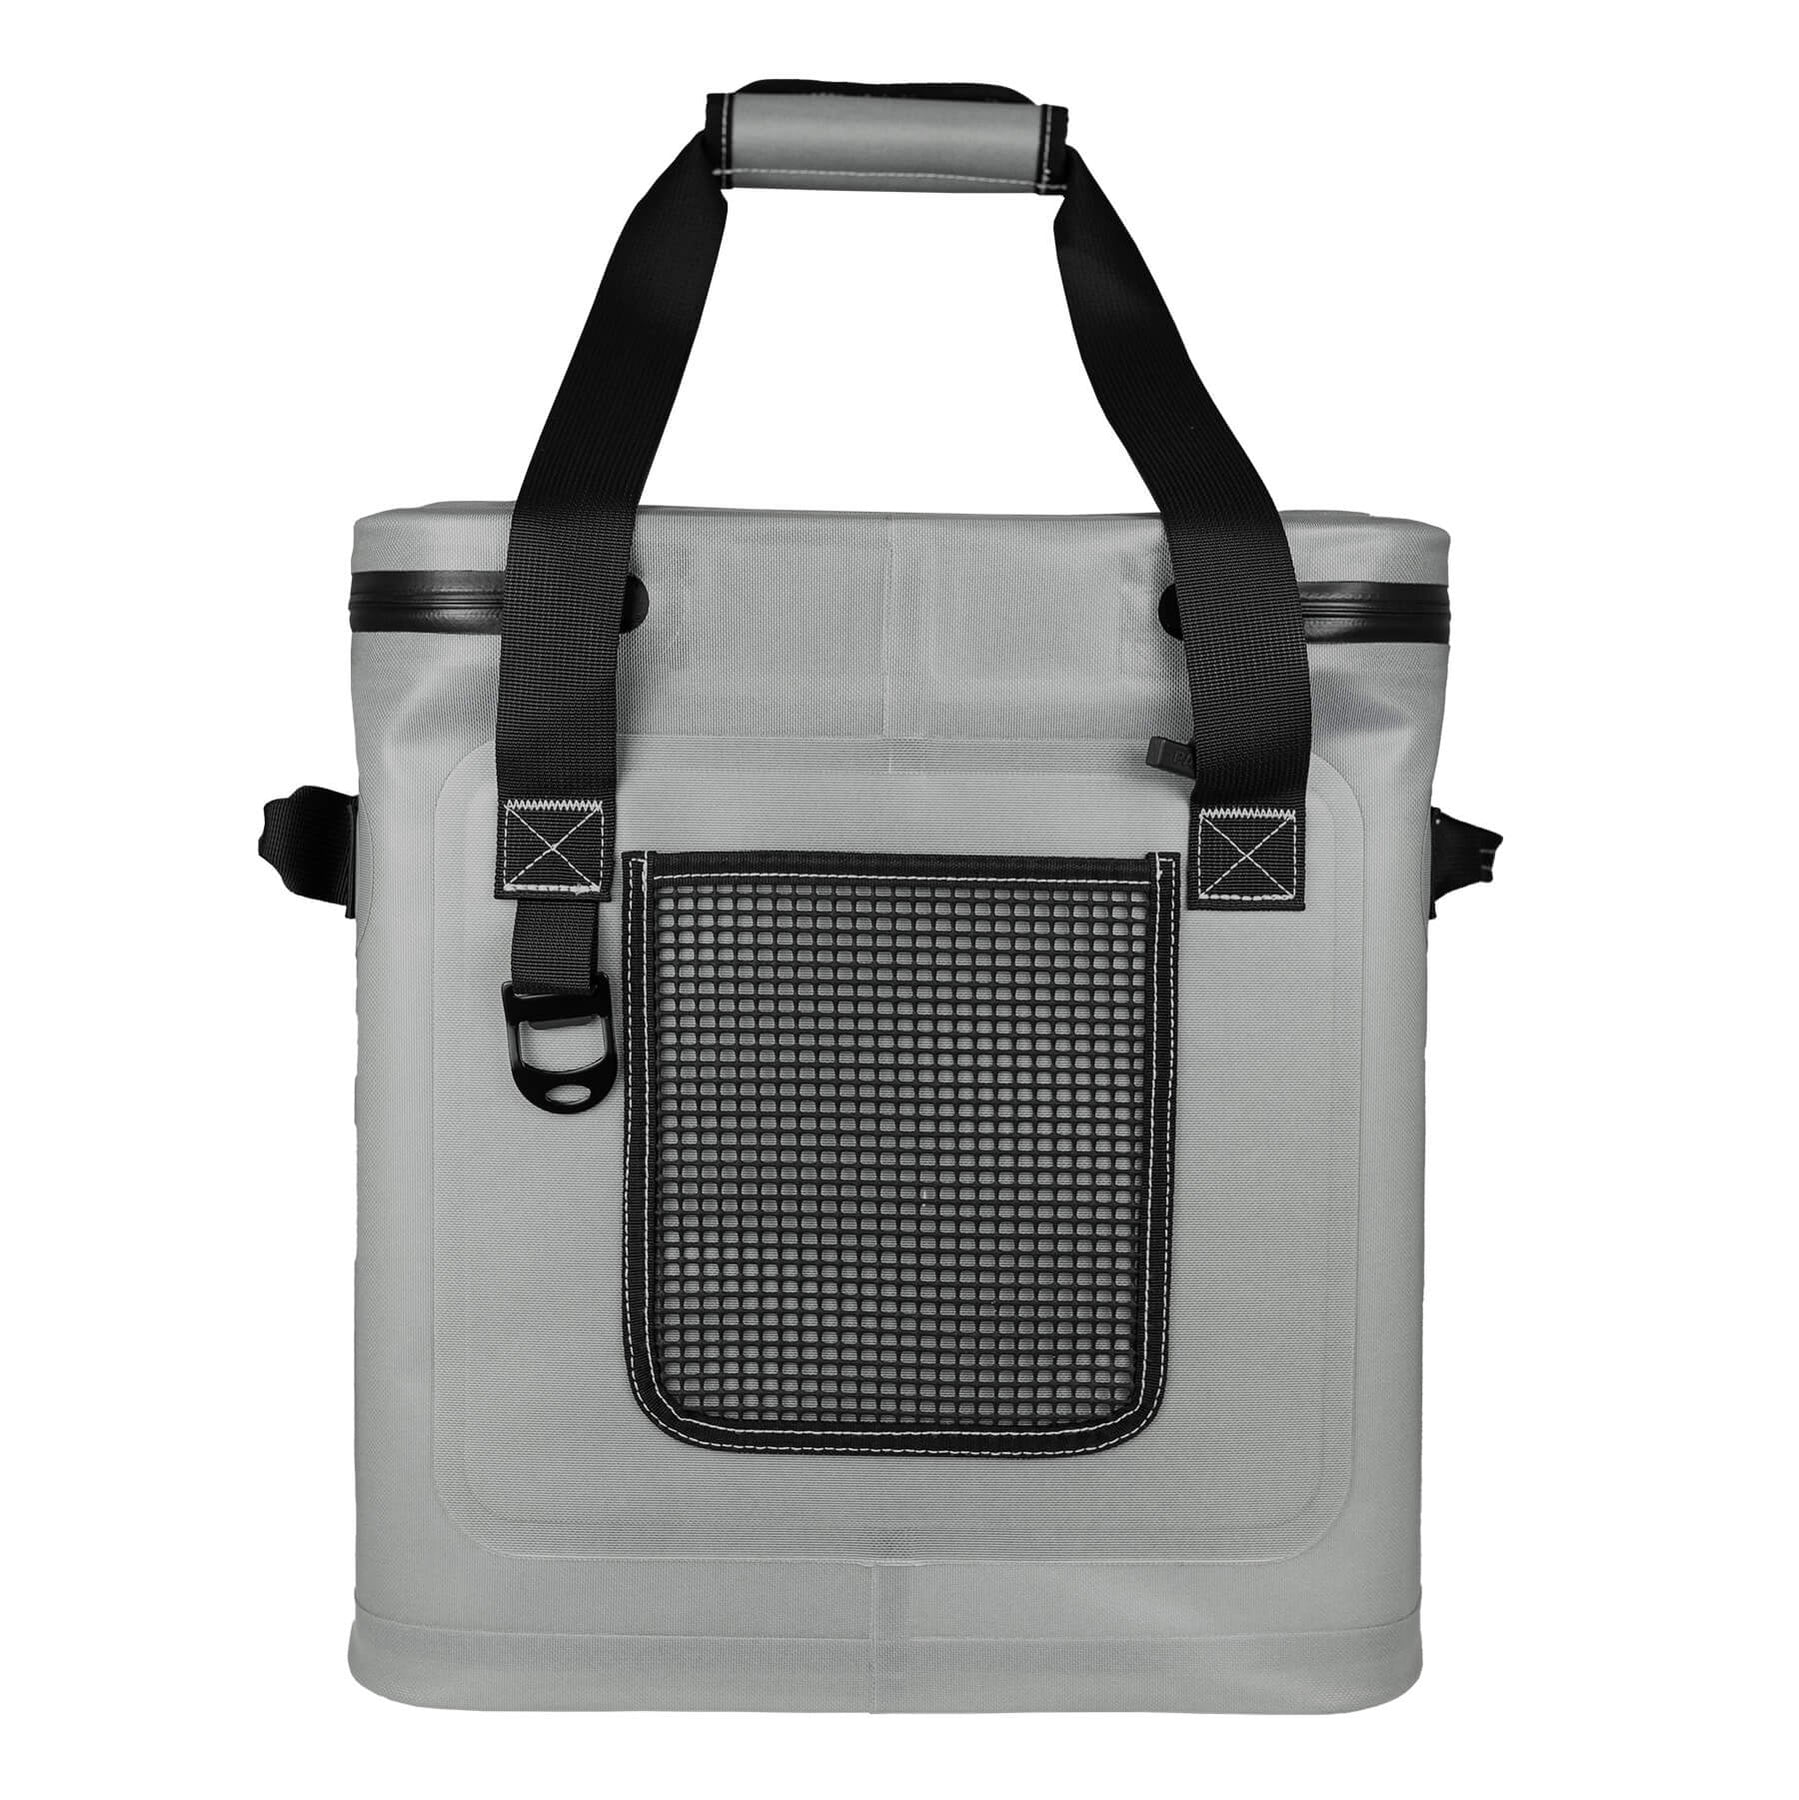 24 Can SoftPack Cooler | Patriot Coolers Heather